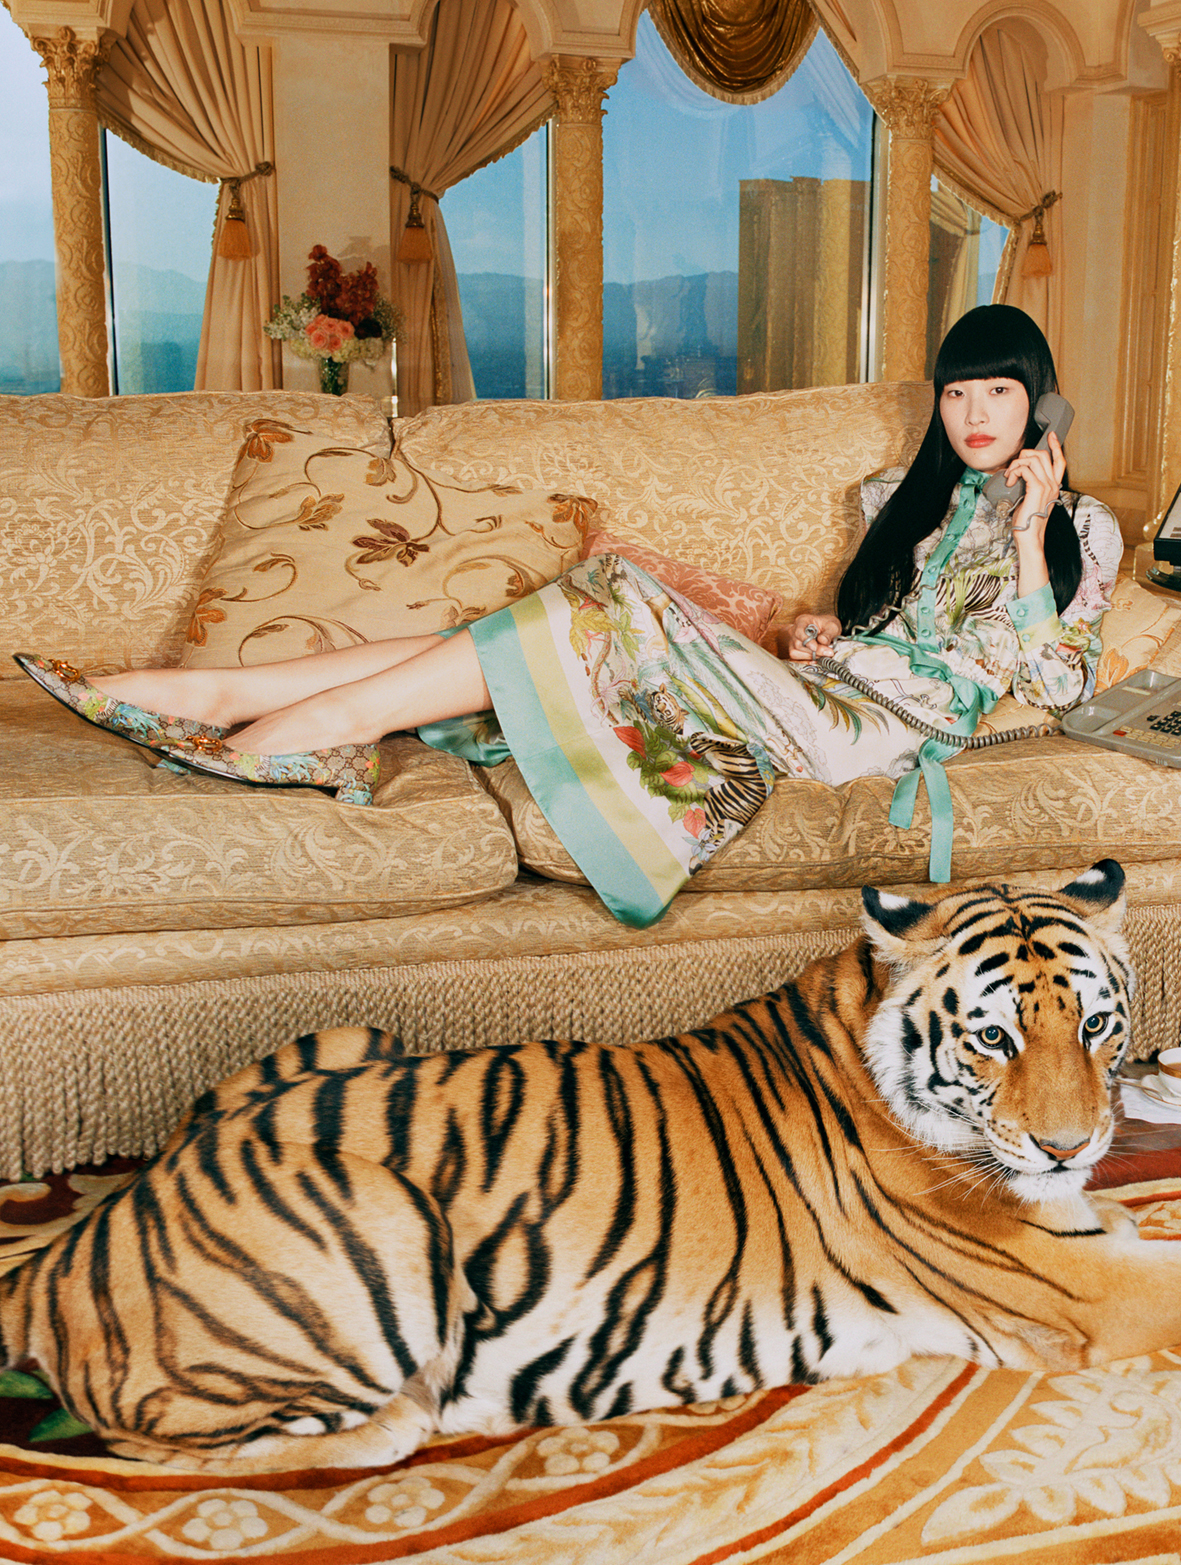 Collection Inspiration: Tigers